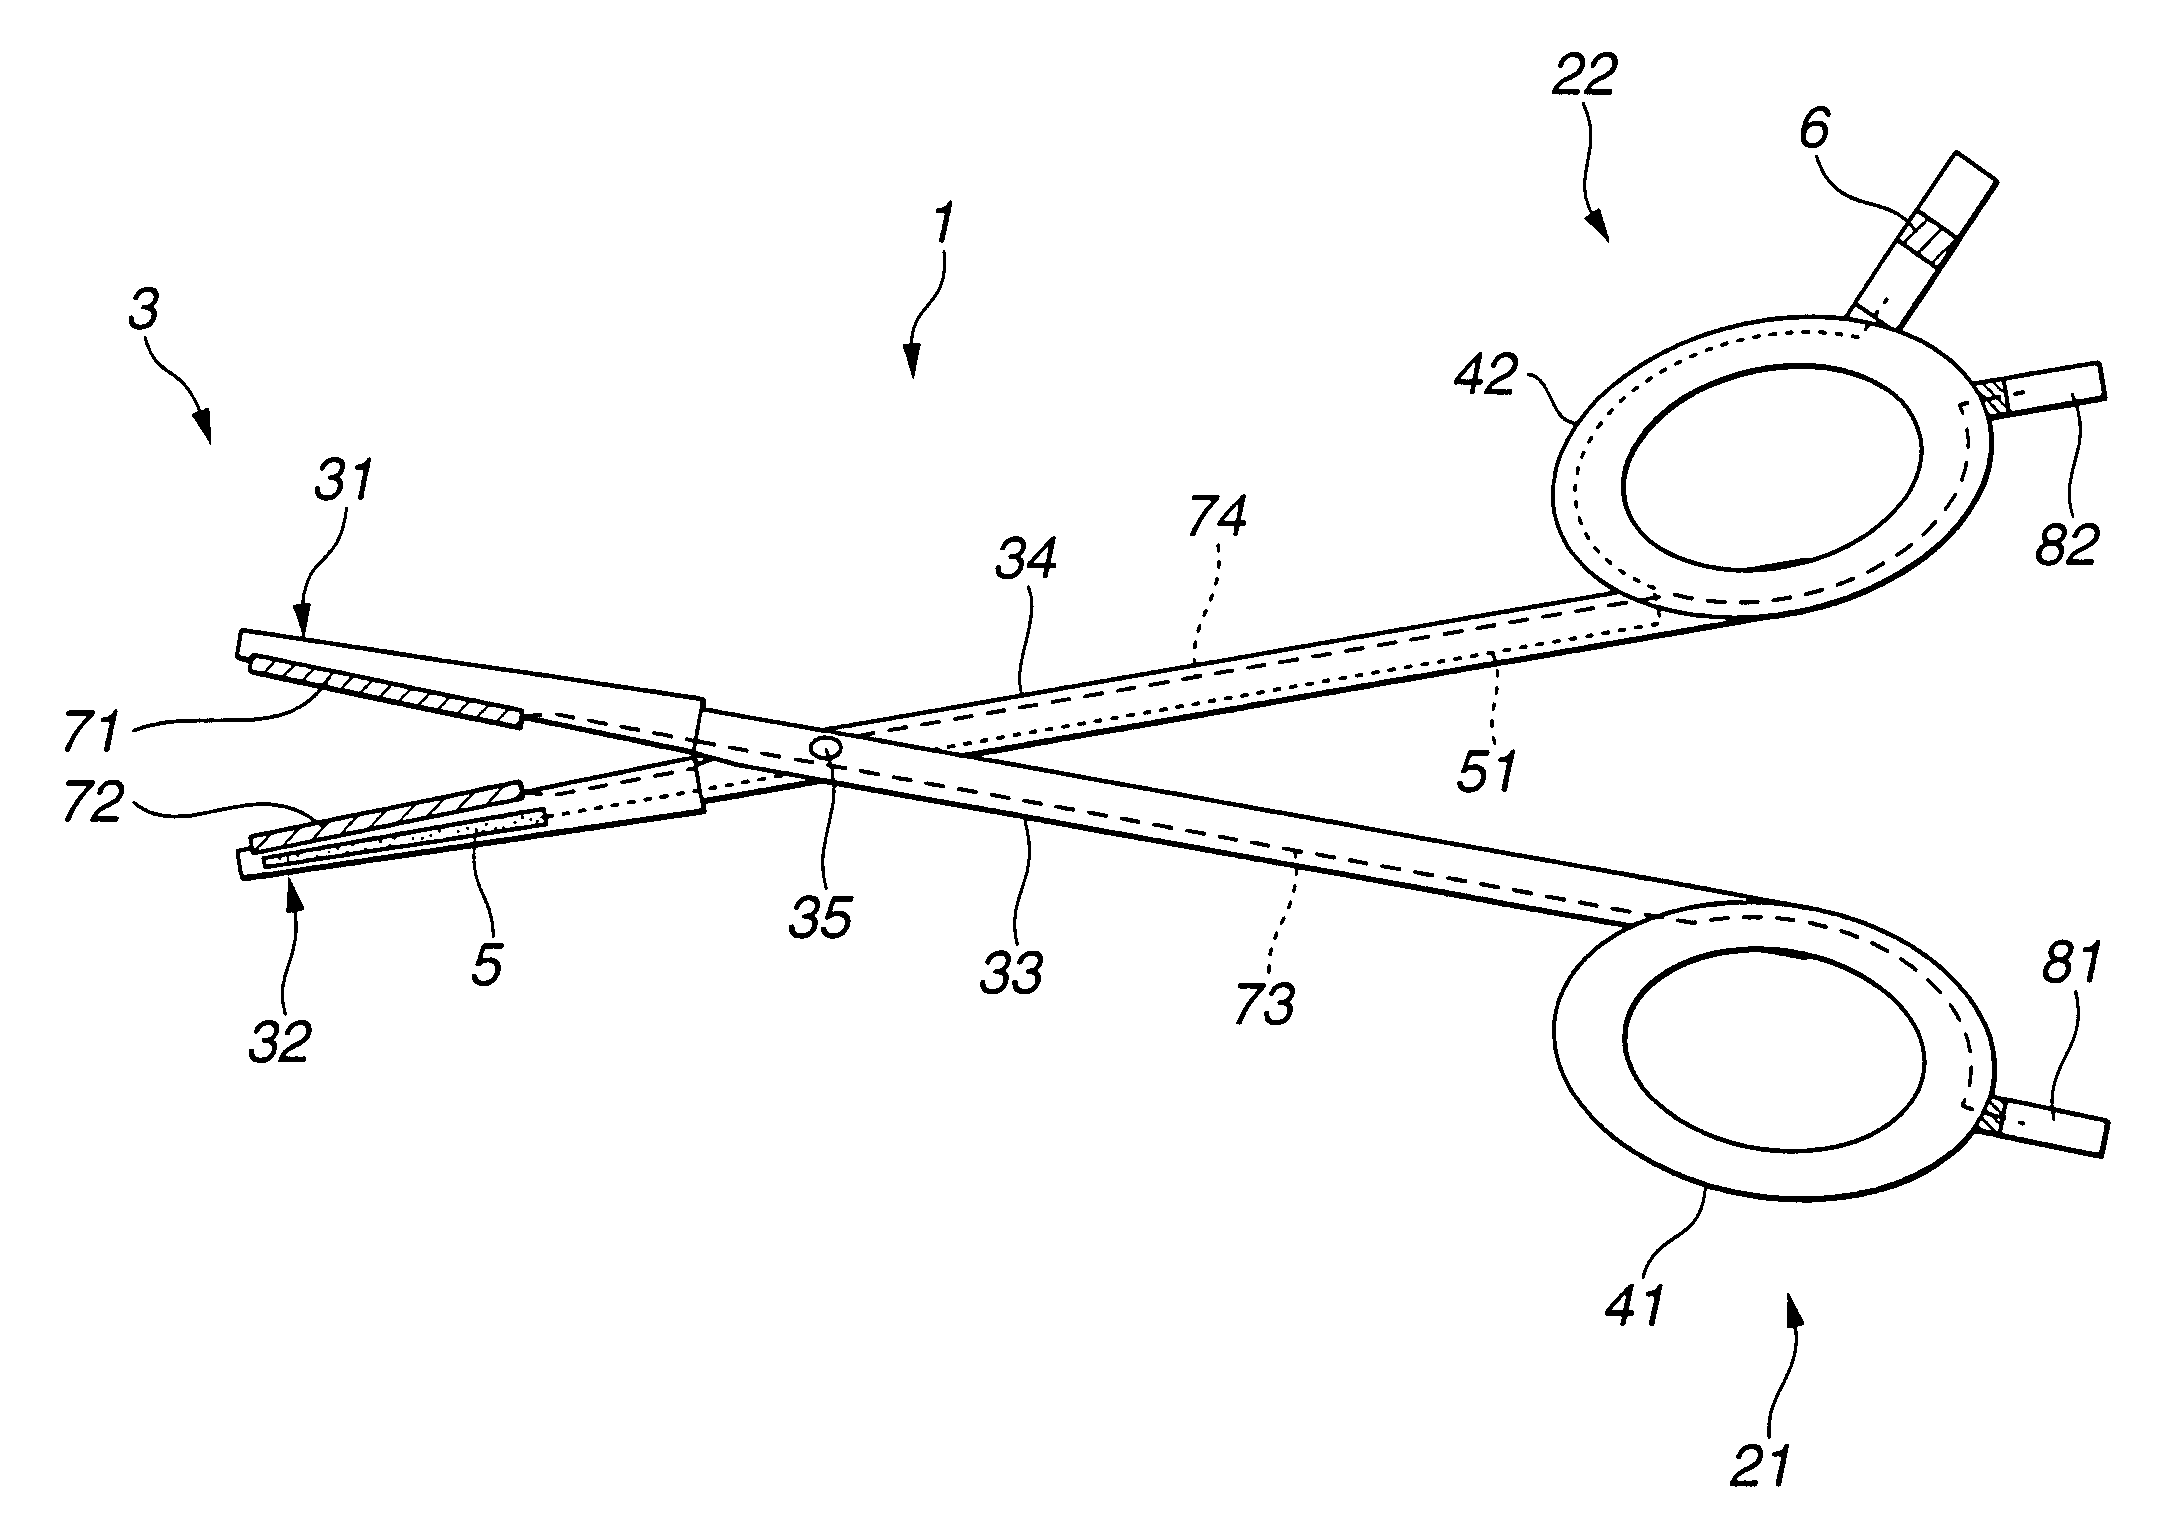 Treating apparatus and treating device for treating living-body tissue